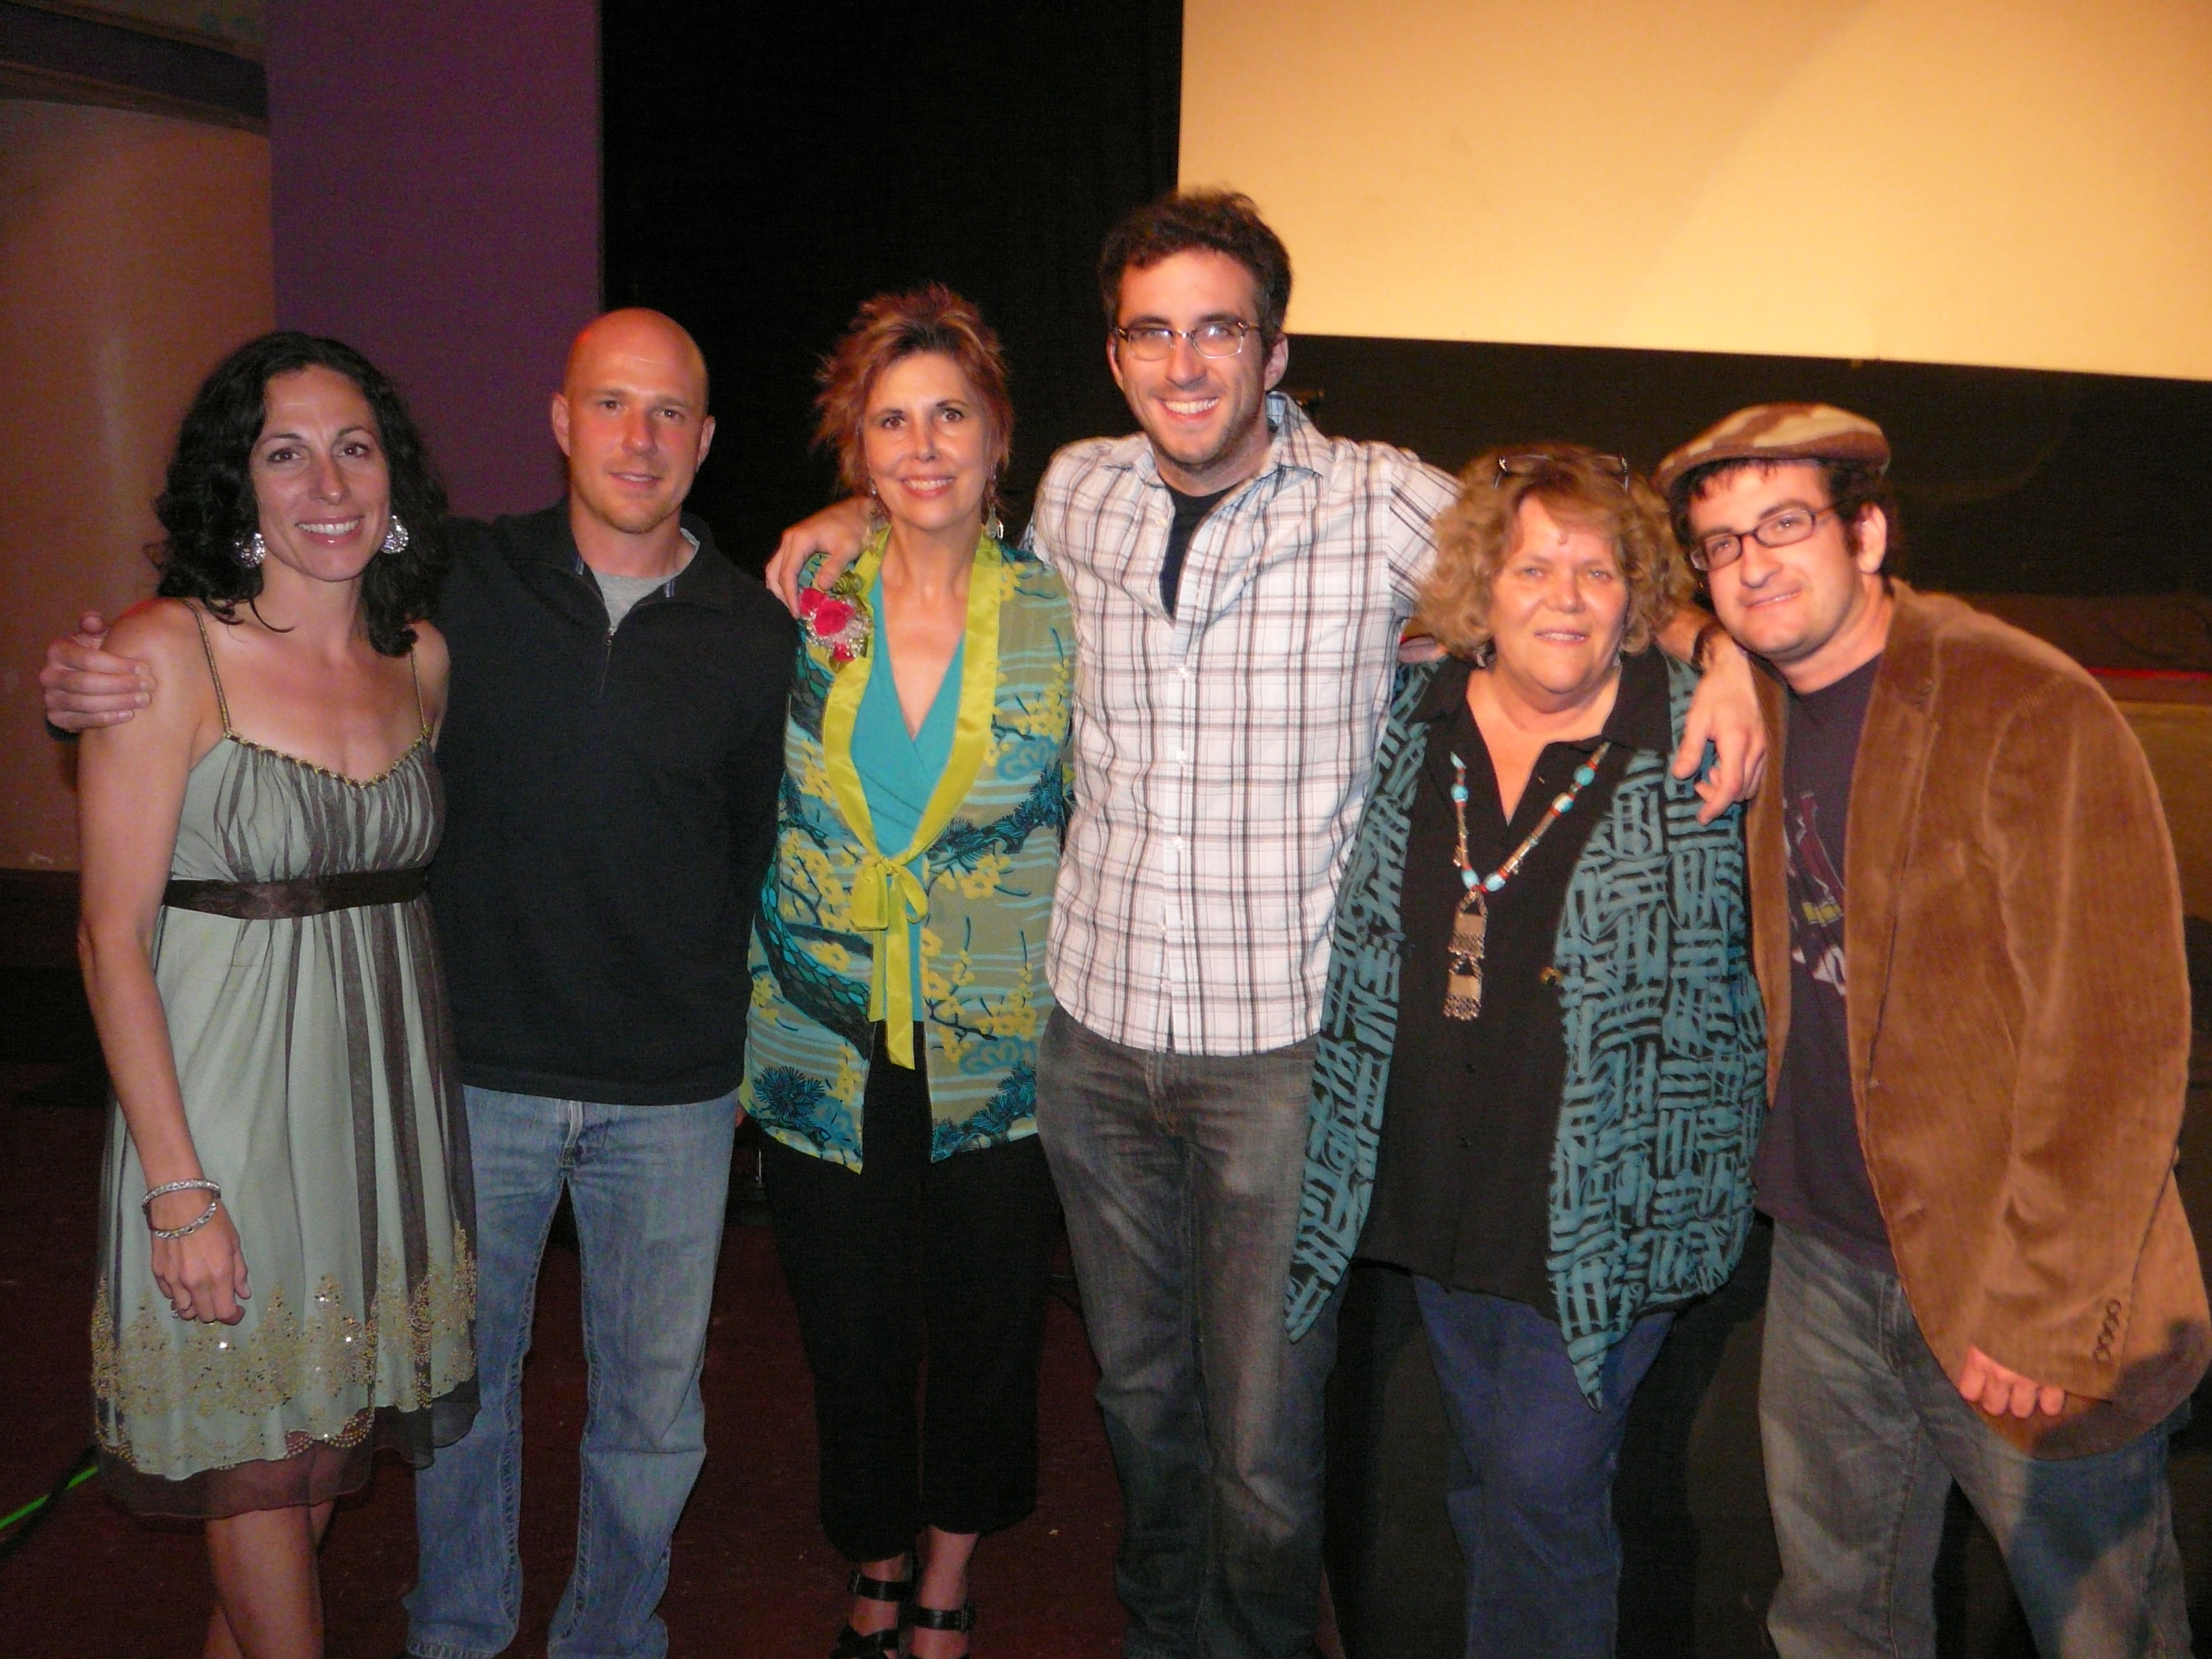 with producer, directors, and crew at the Humboldt County premier of 